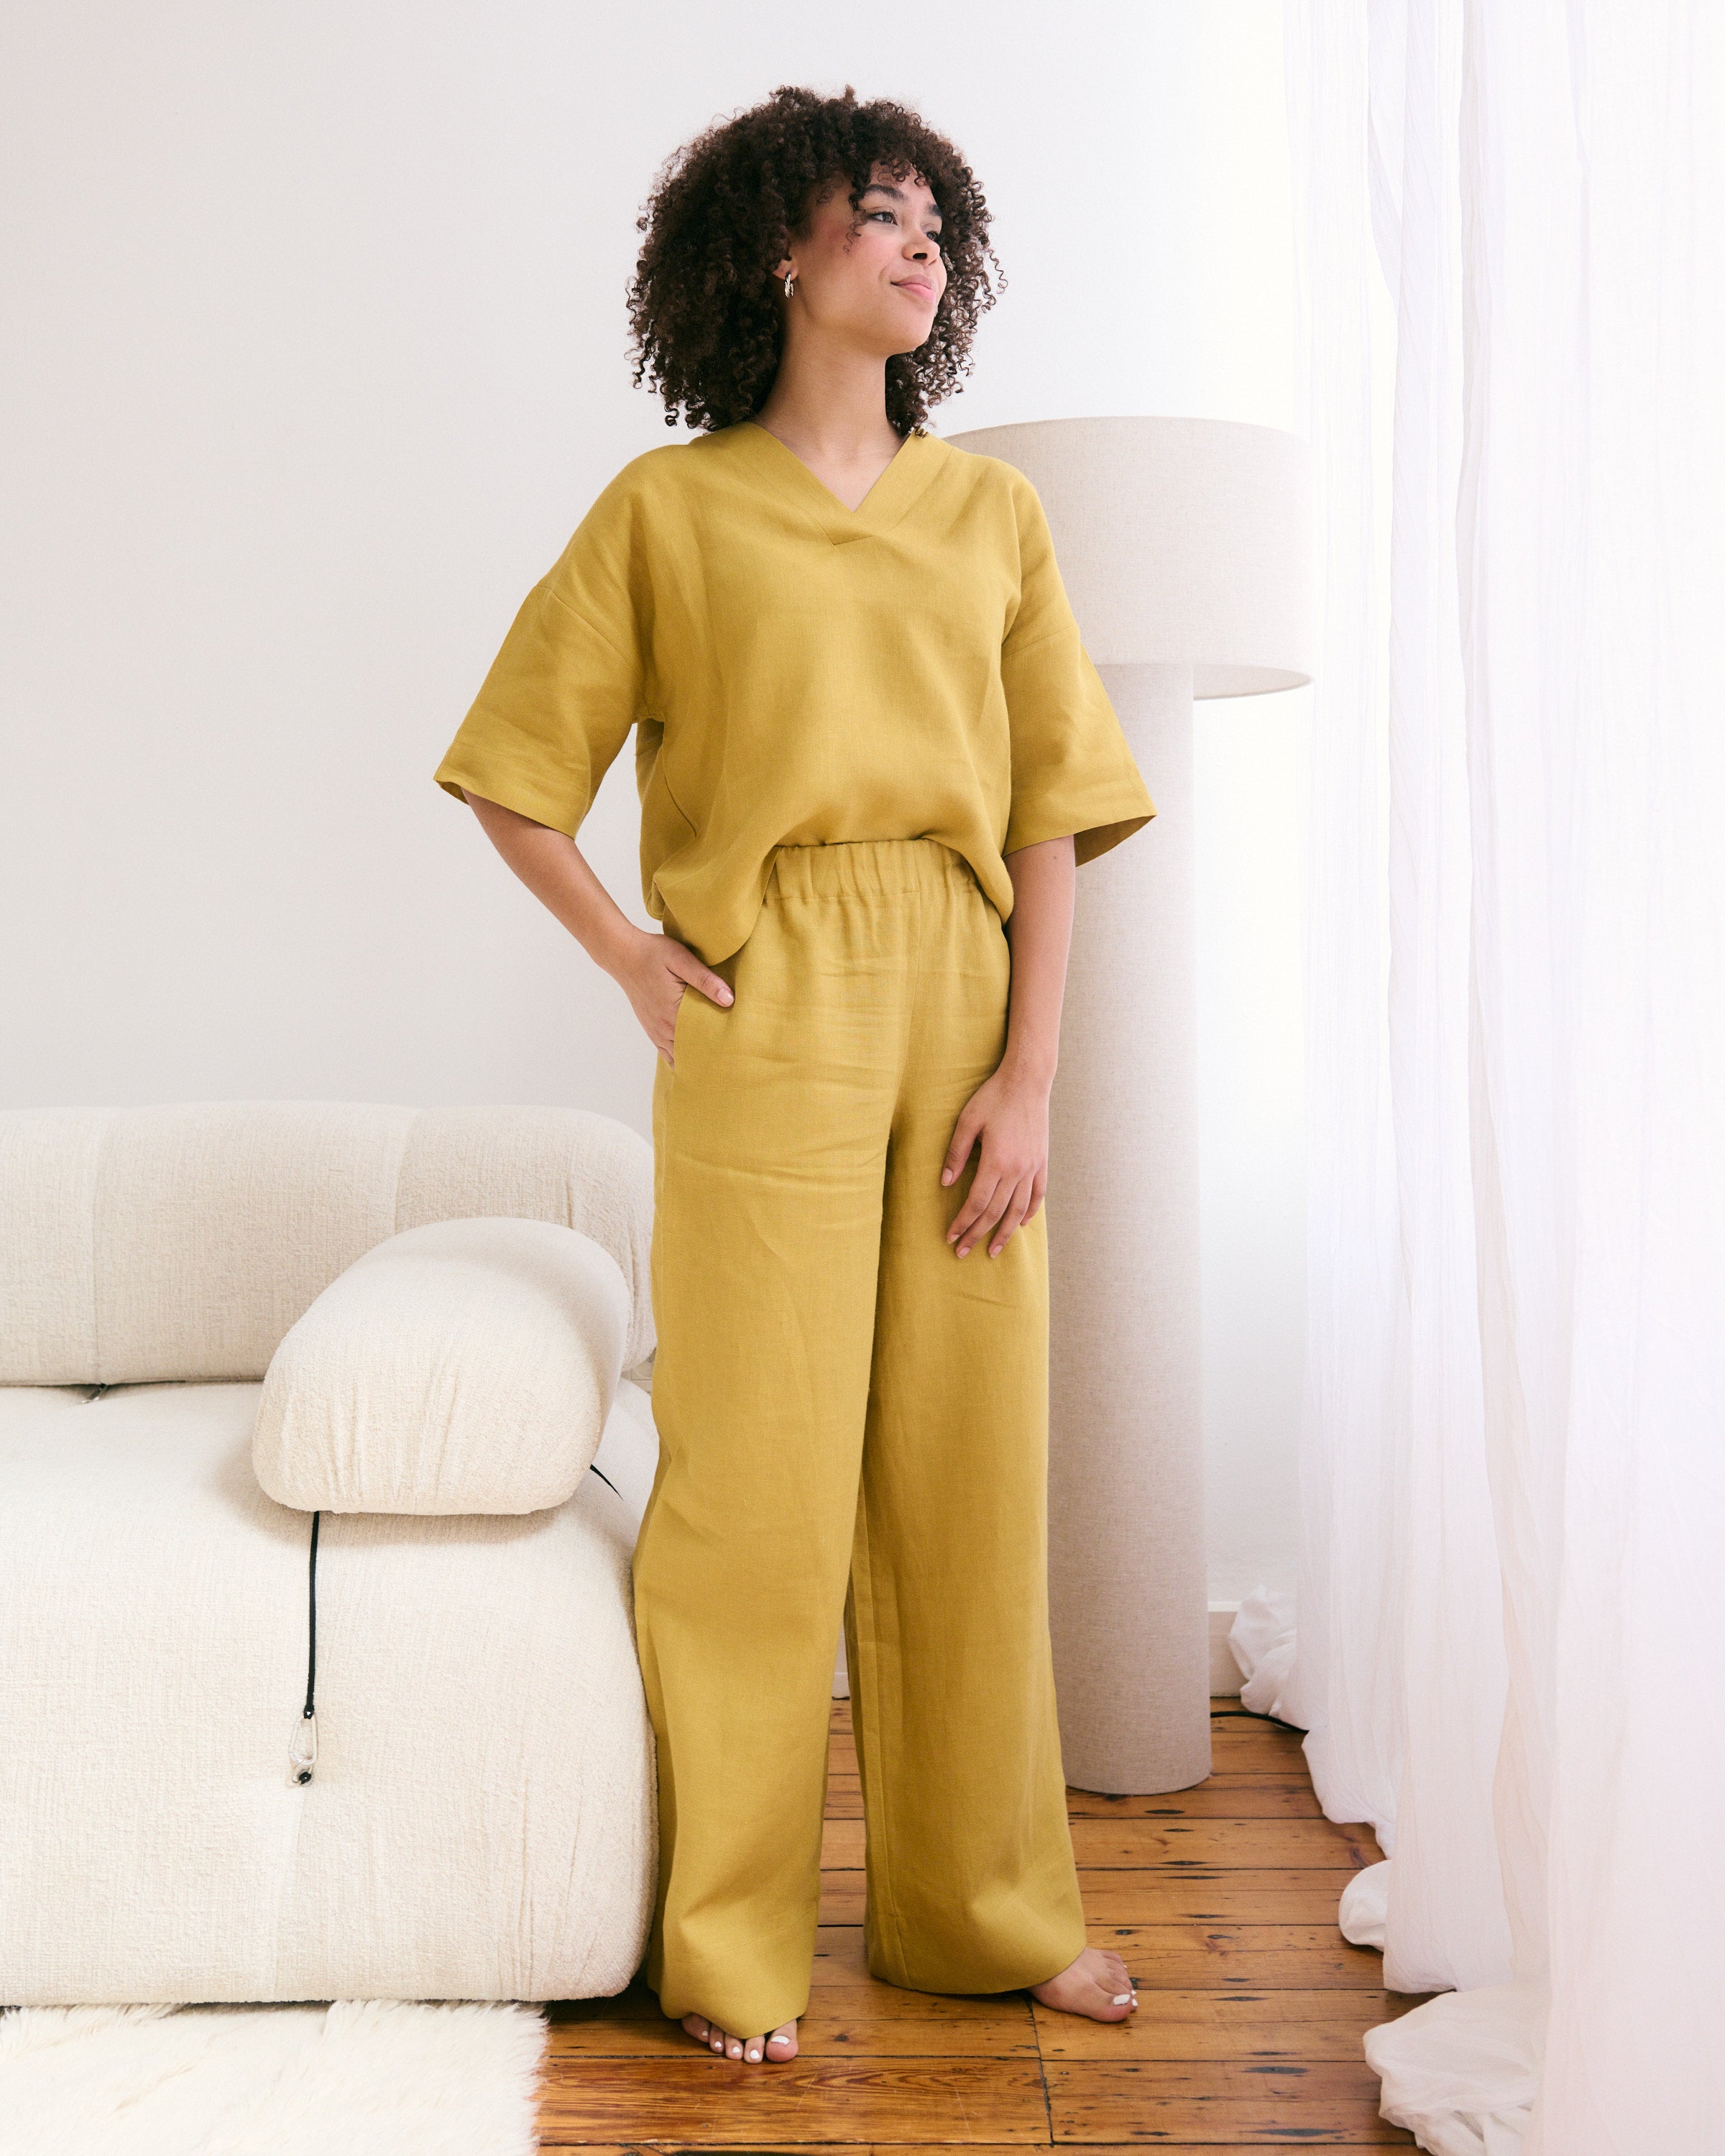 Comfortable mustard yellow linen pants and top made from 100% Belgian linen.